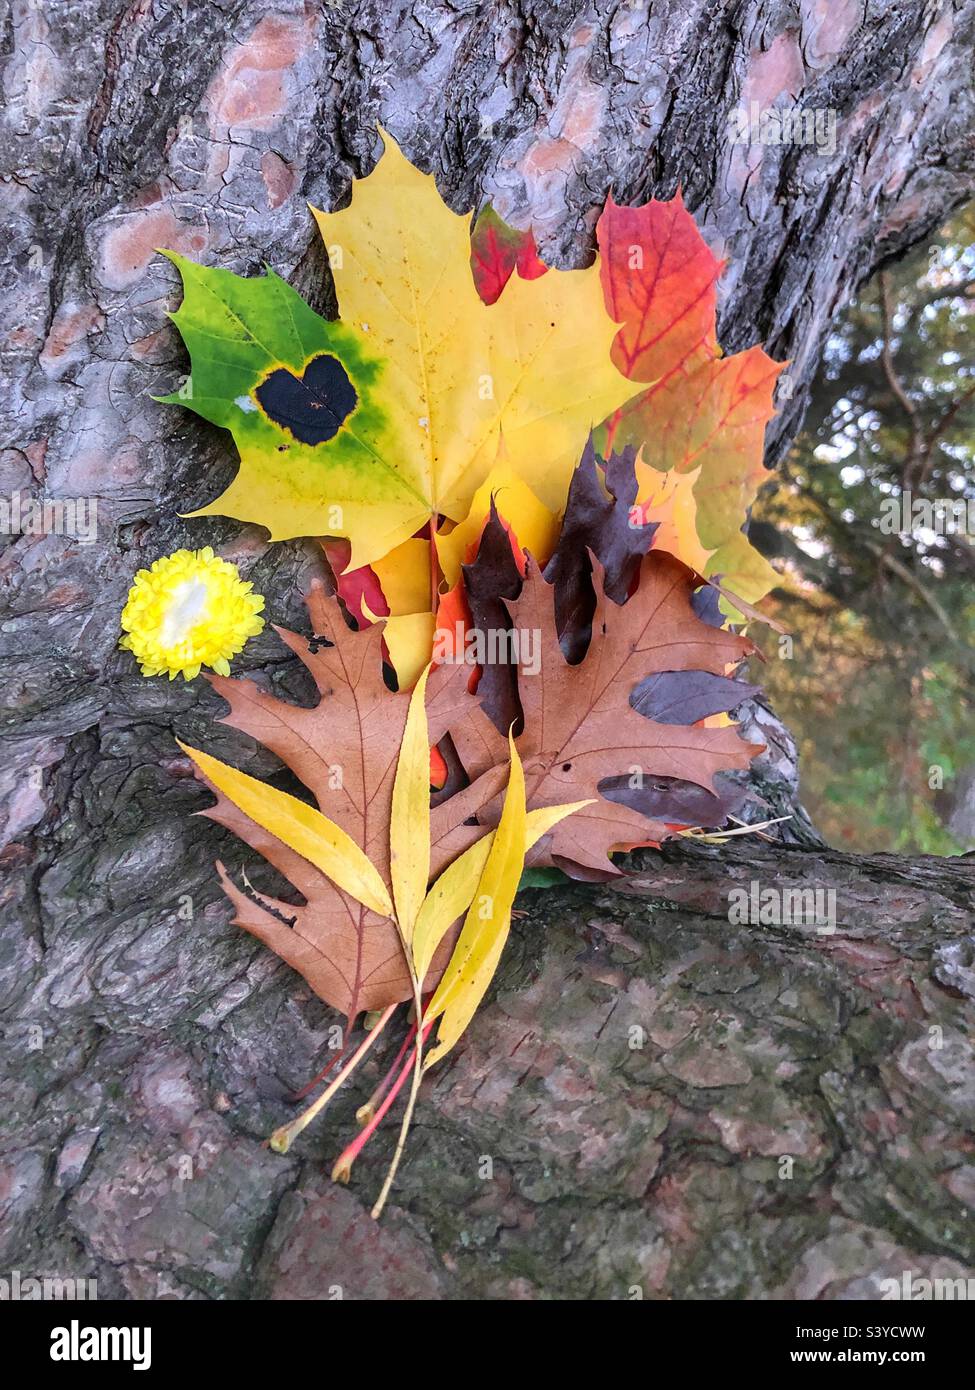 A bouquet of colourful autumn leaves. Stock Photo